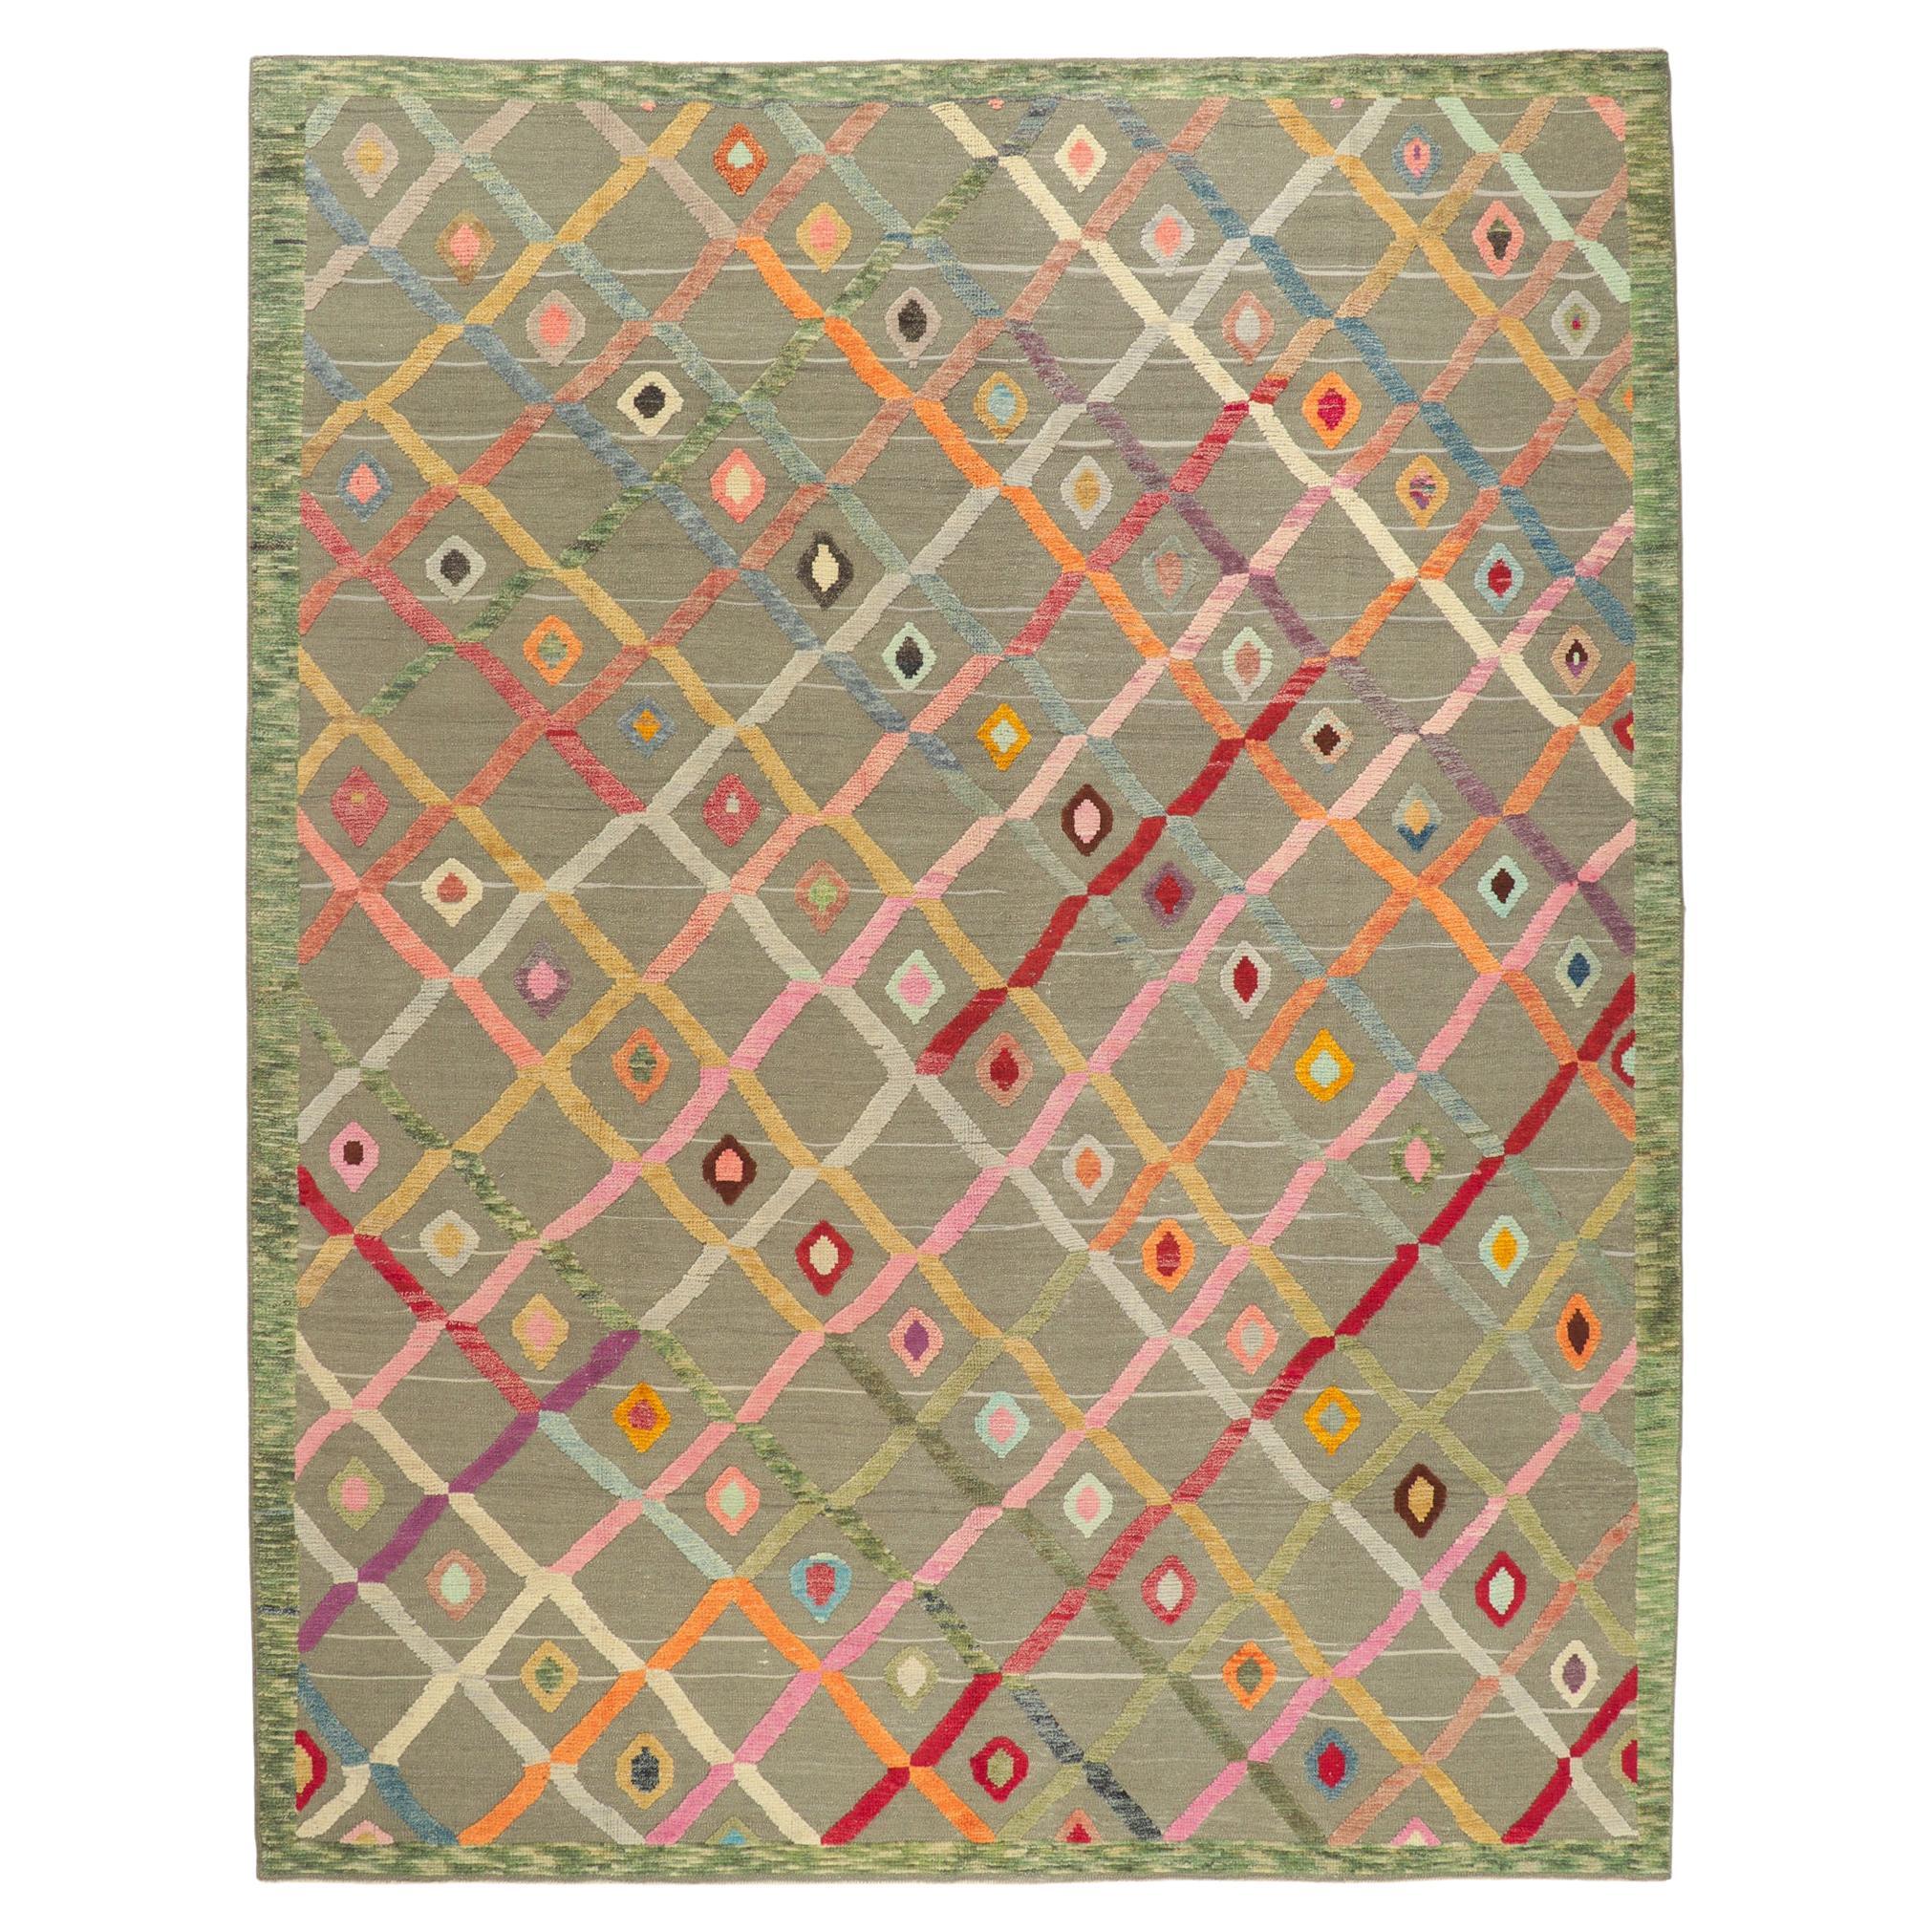 New Colorful High-Low Textured Rug